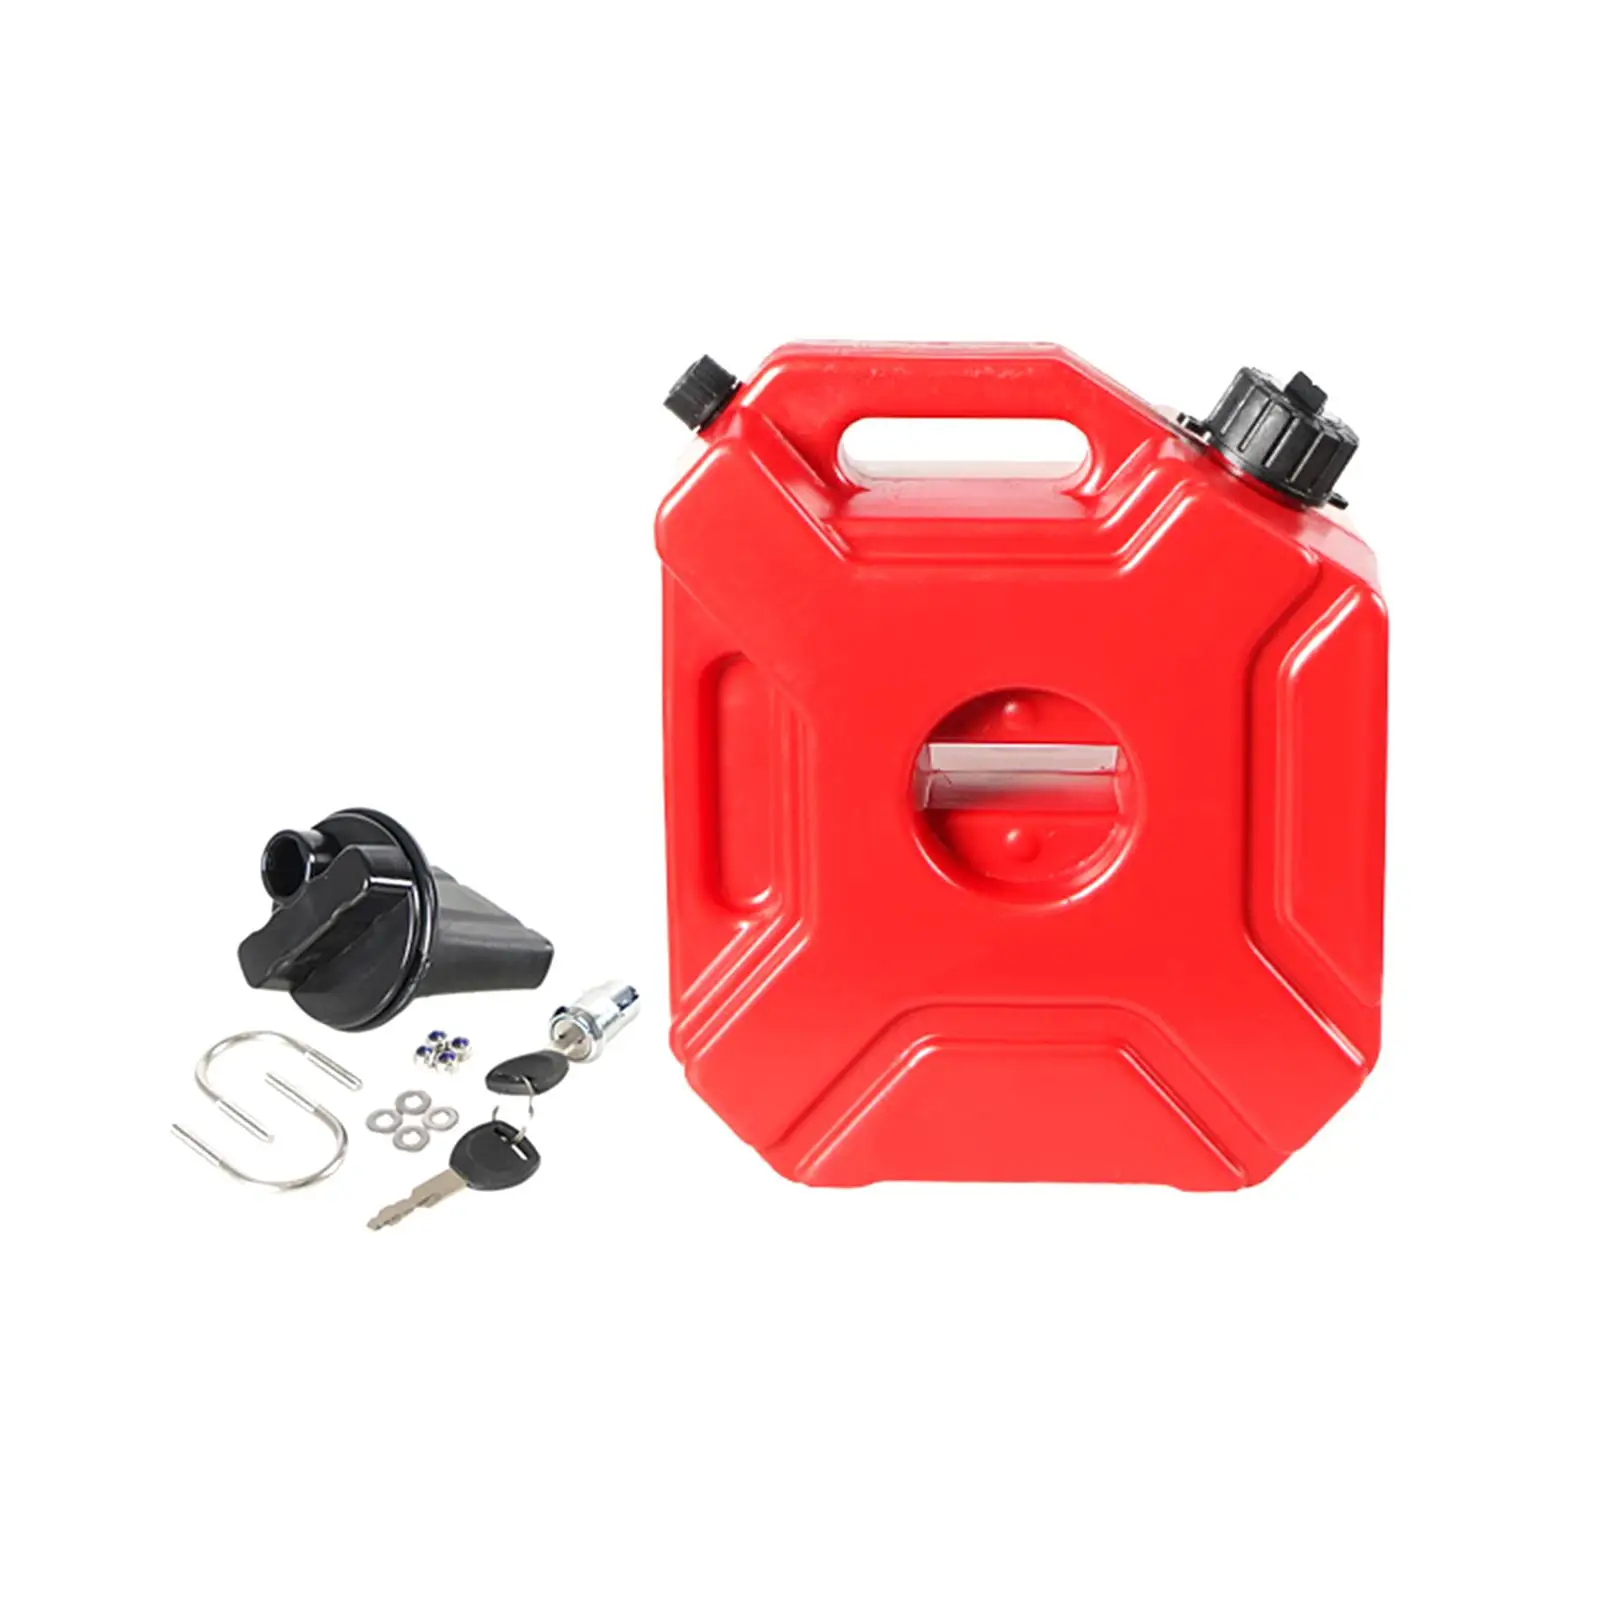 Petrol Tanks 5L with Lock Easily Install Gasoline Tank Spare Container for Moto Most Cars Car Travel SUV Accessories